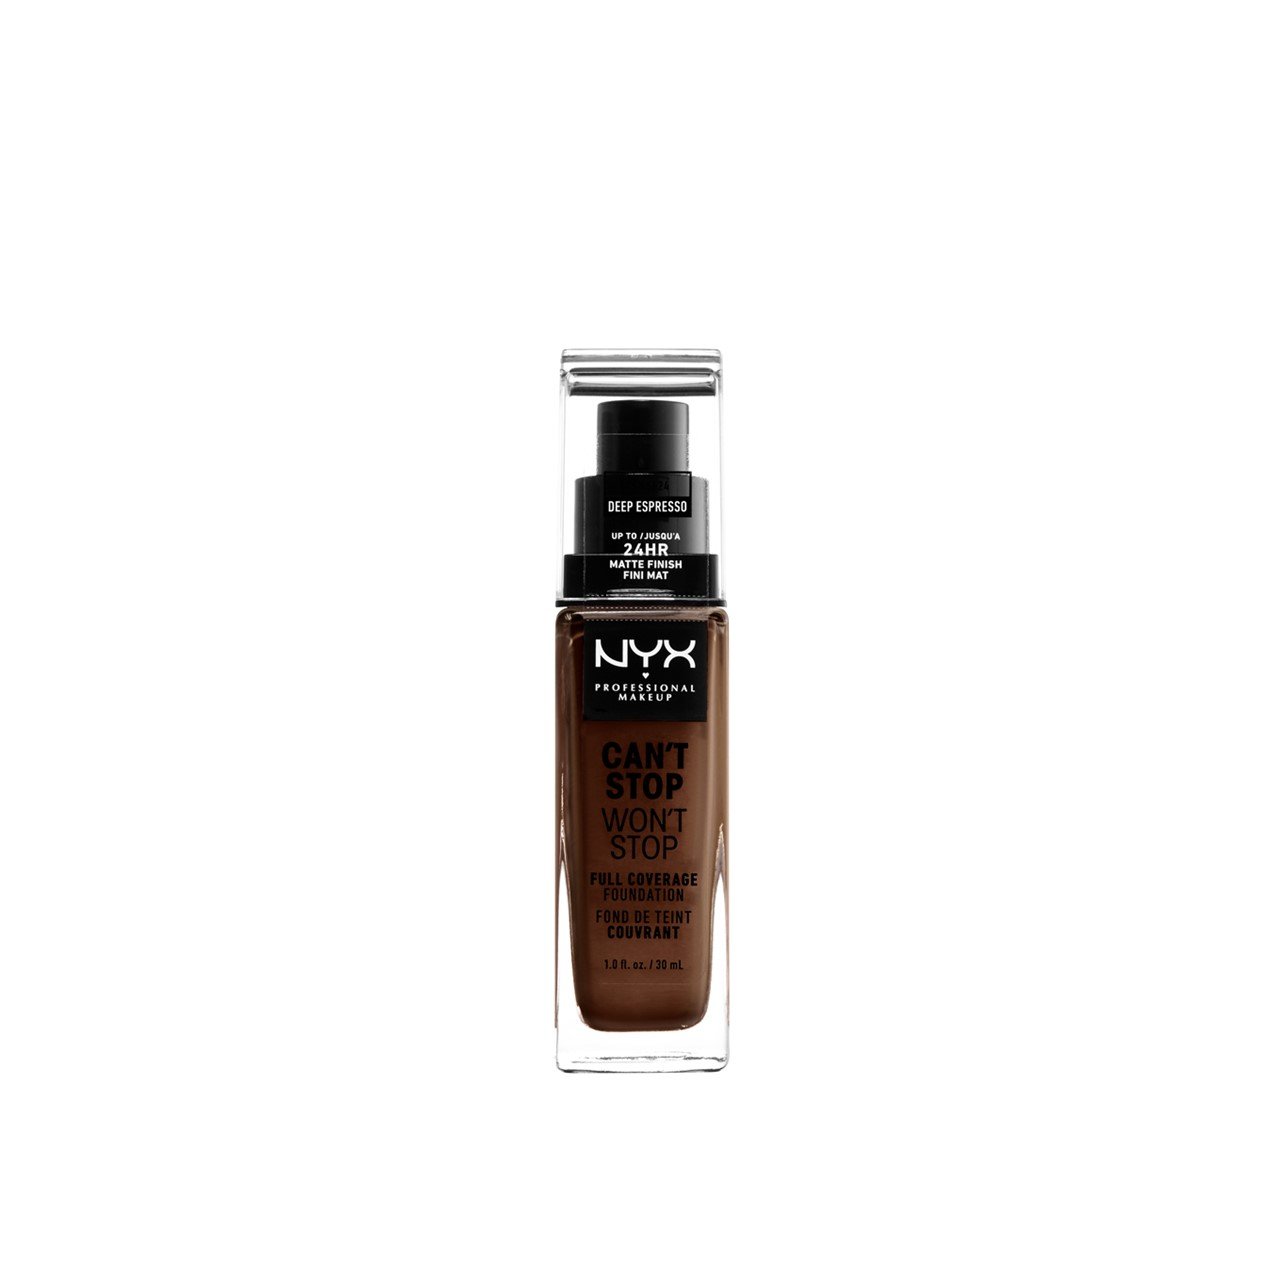 NYX Pro Makeup Can't Stop Won't Stop Foundation Deep Espresso 30ml